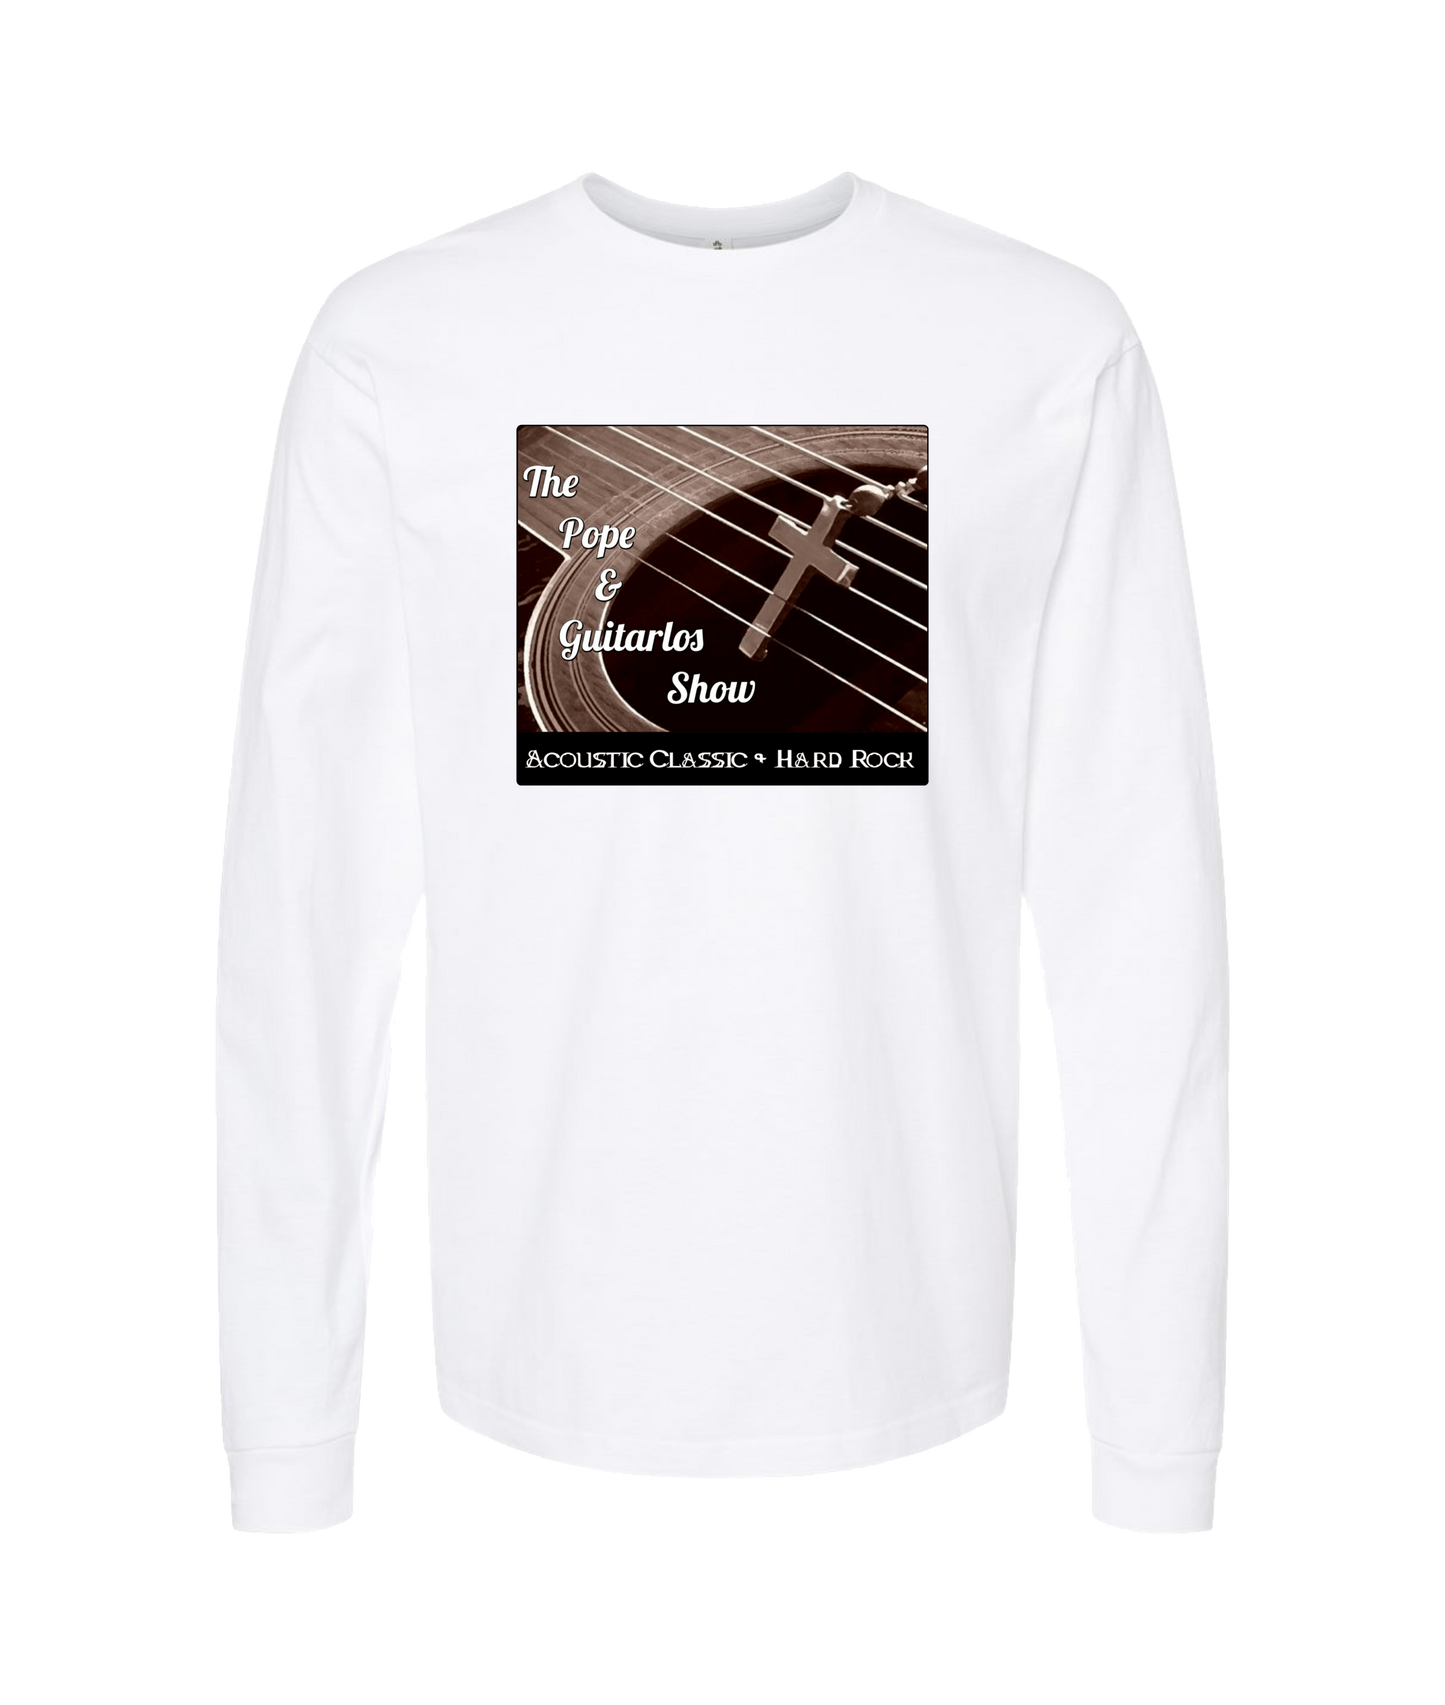 The Pope and Guitarlos Show - Guitar Cross - White Long Sleeve T